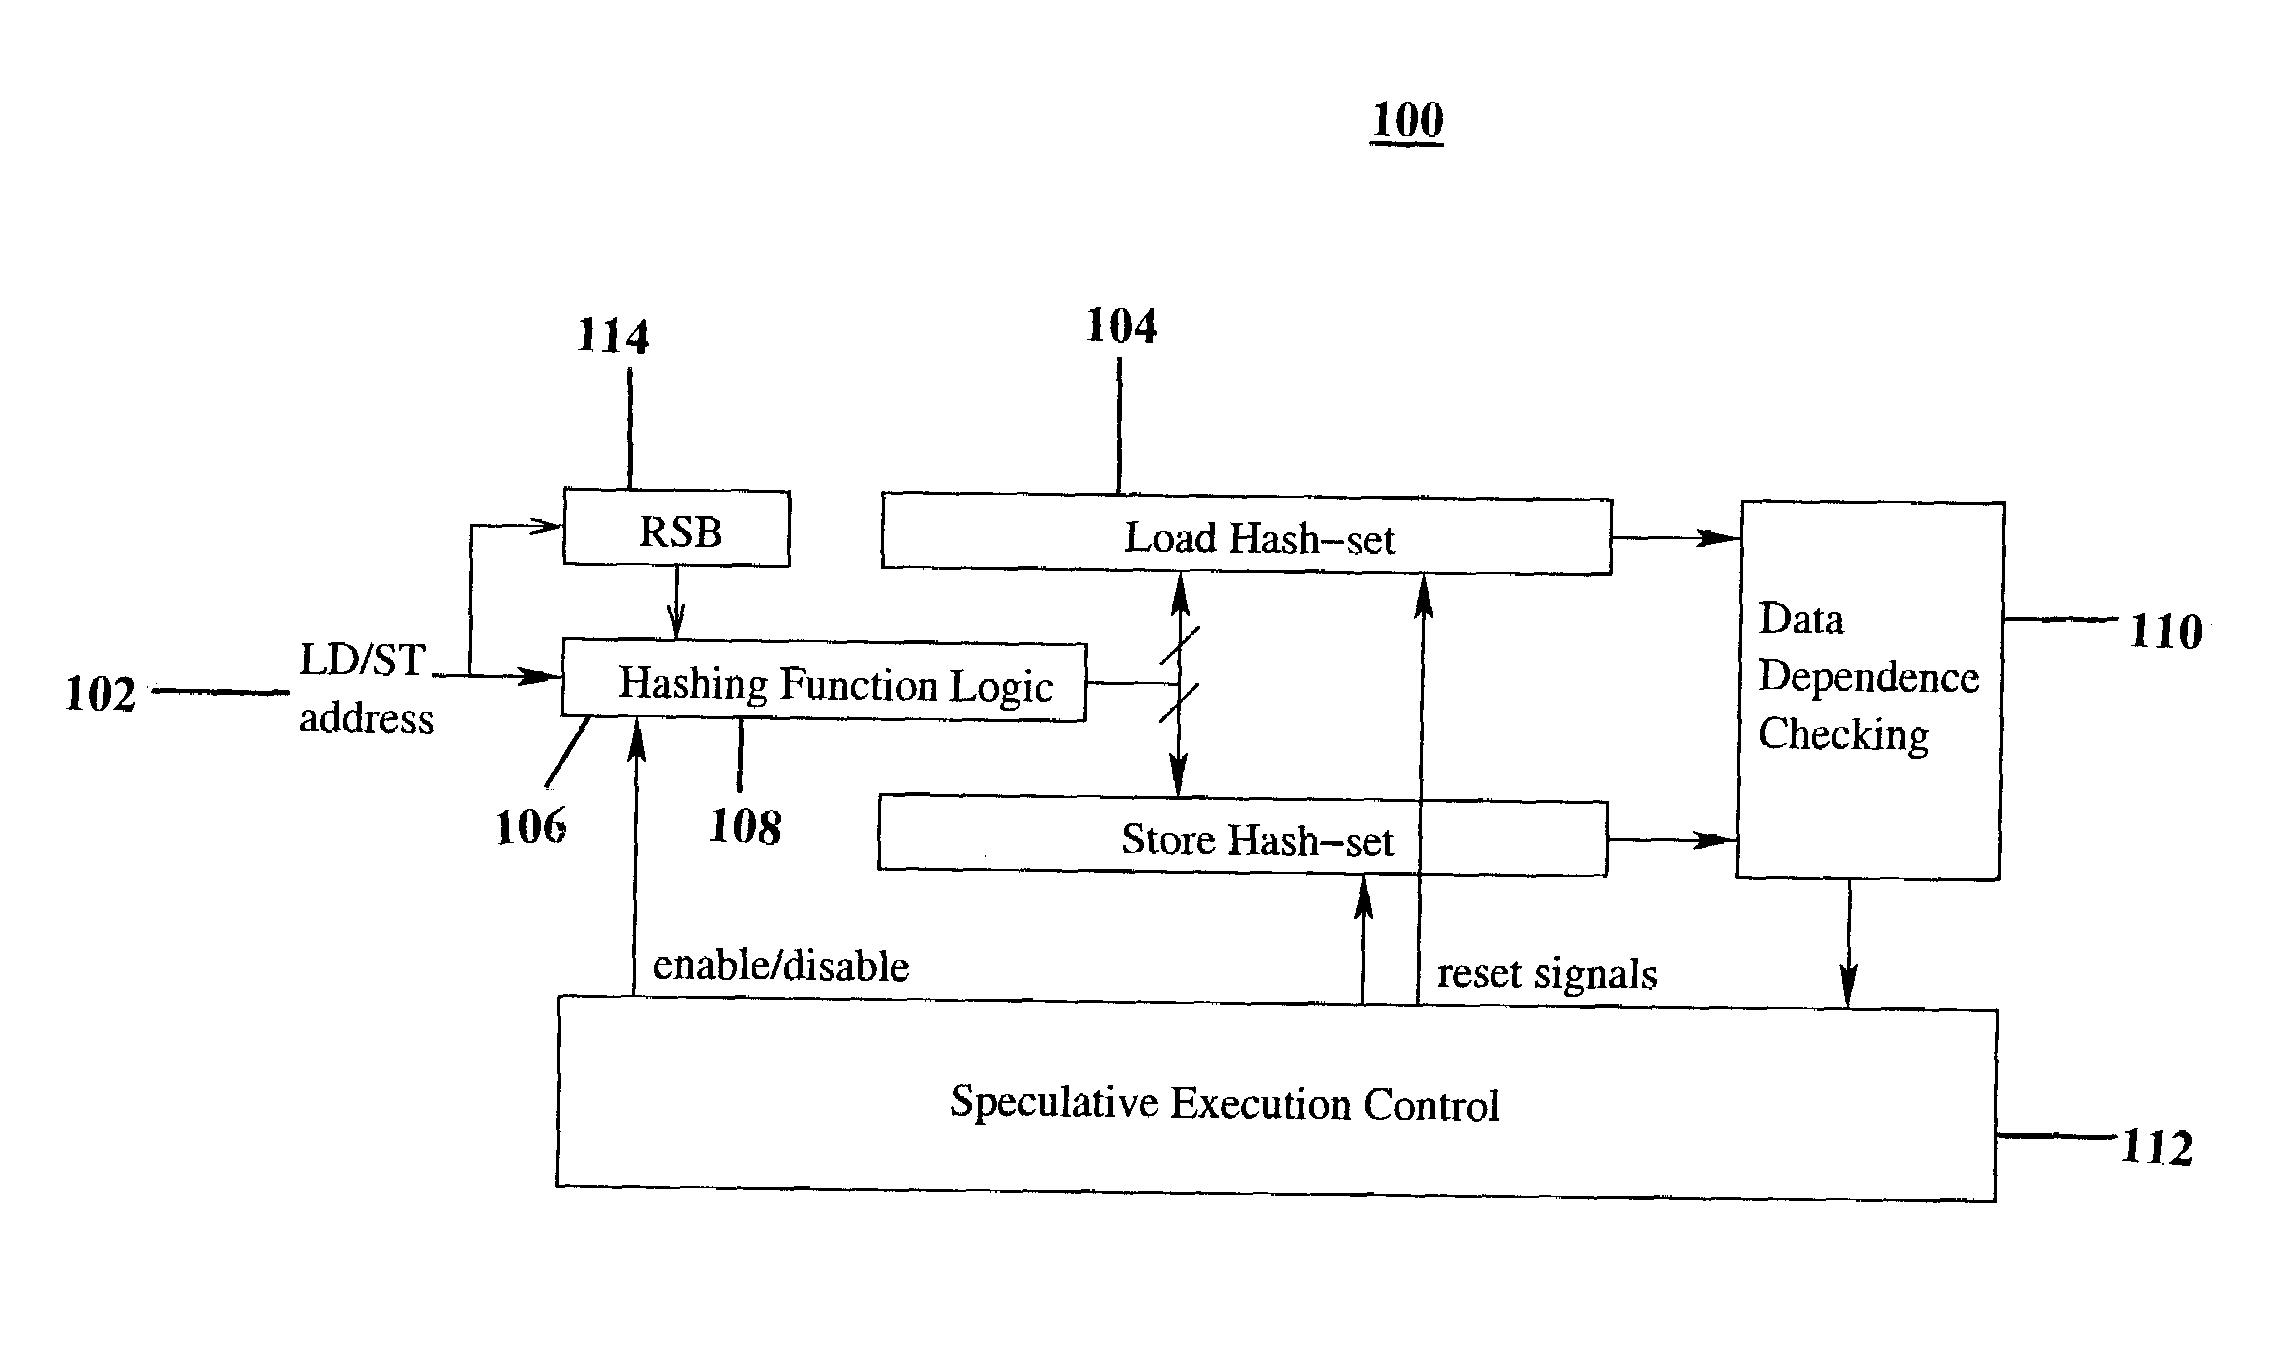 Method and apparatus for implementing efficient data dependence tracking for multiprocessor architectures